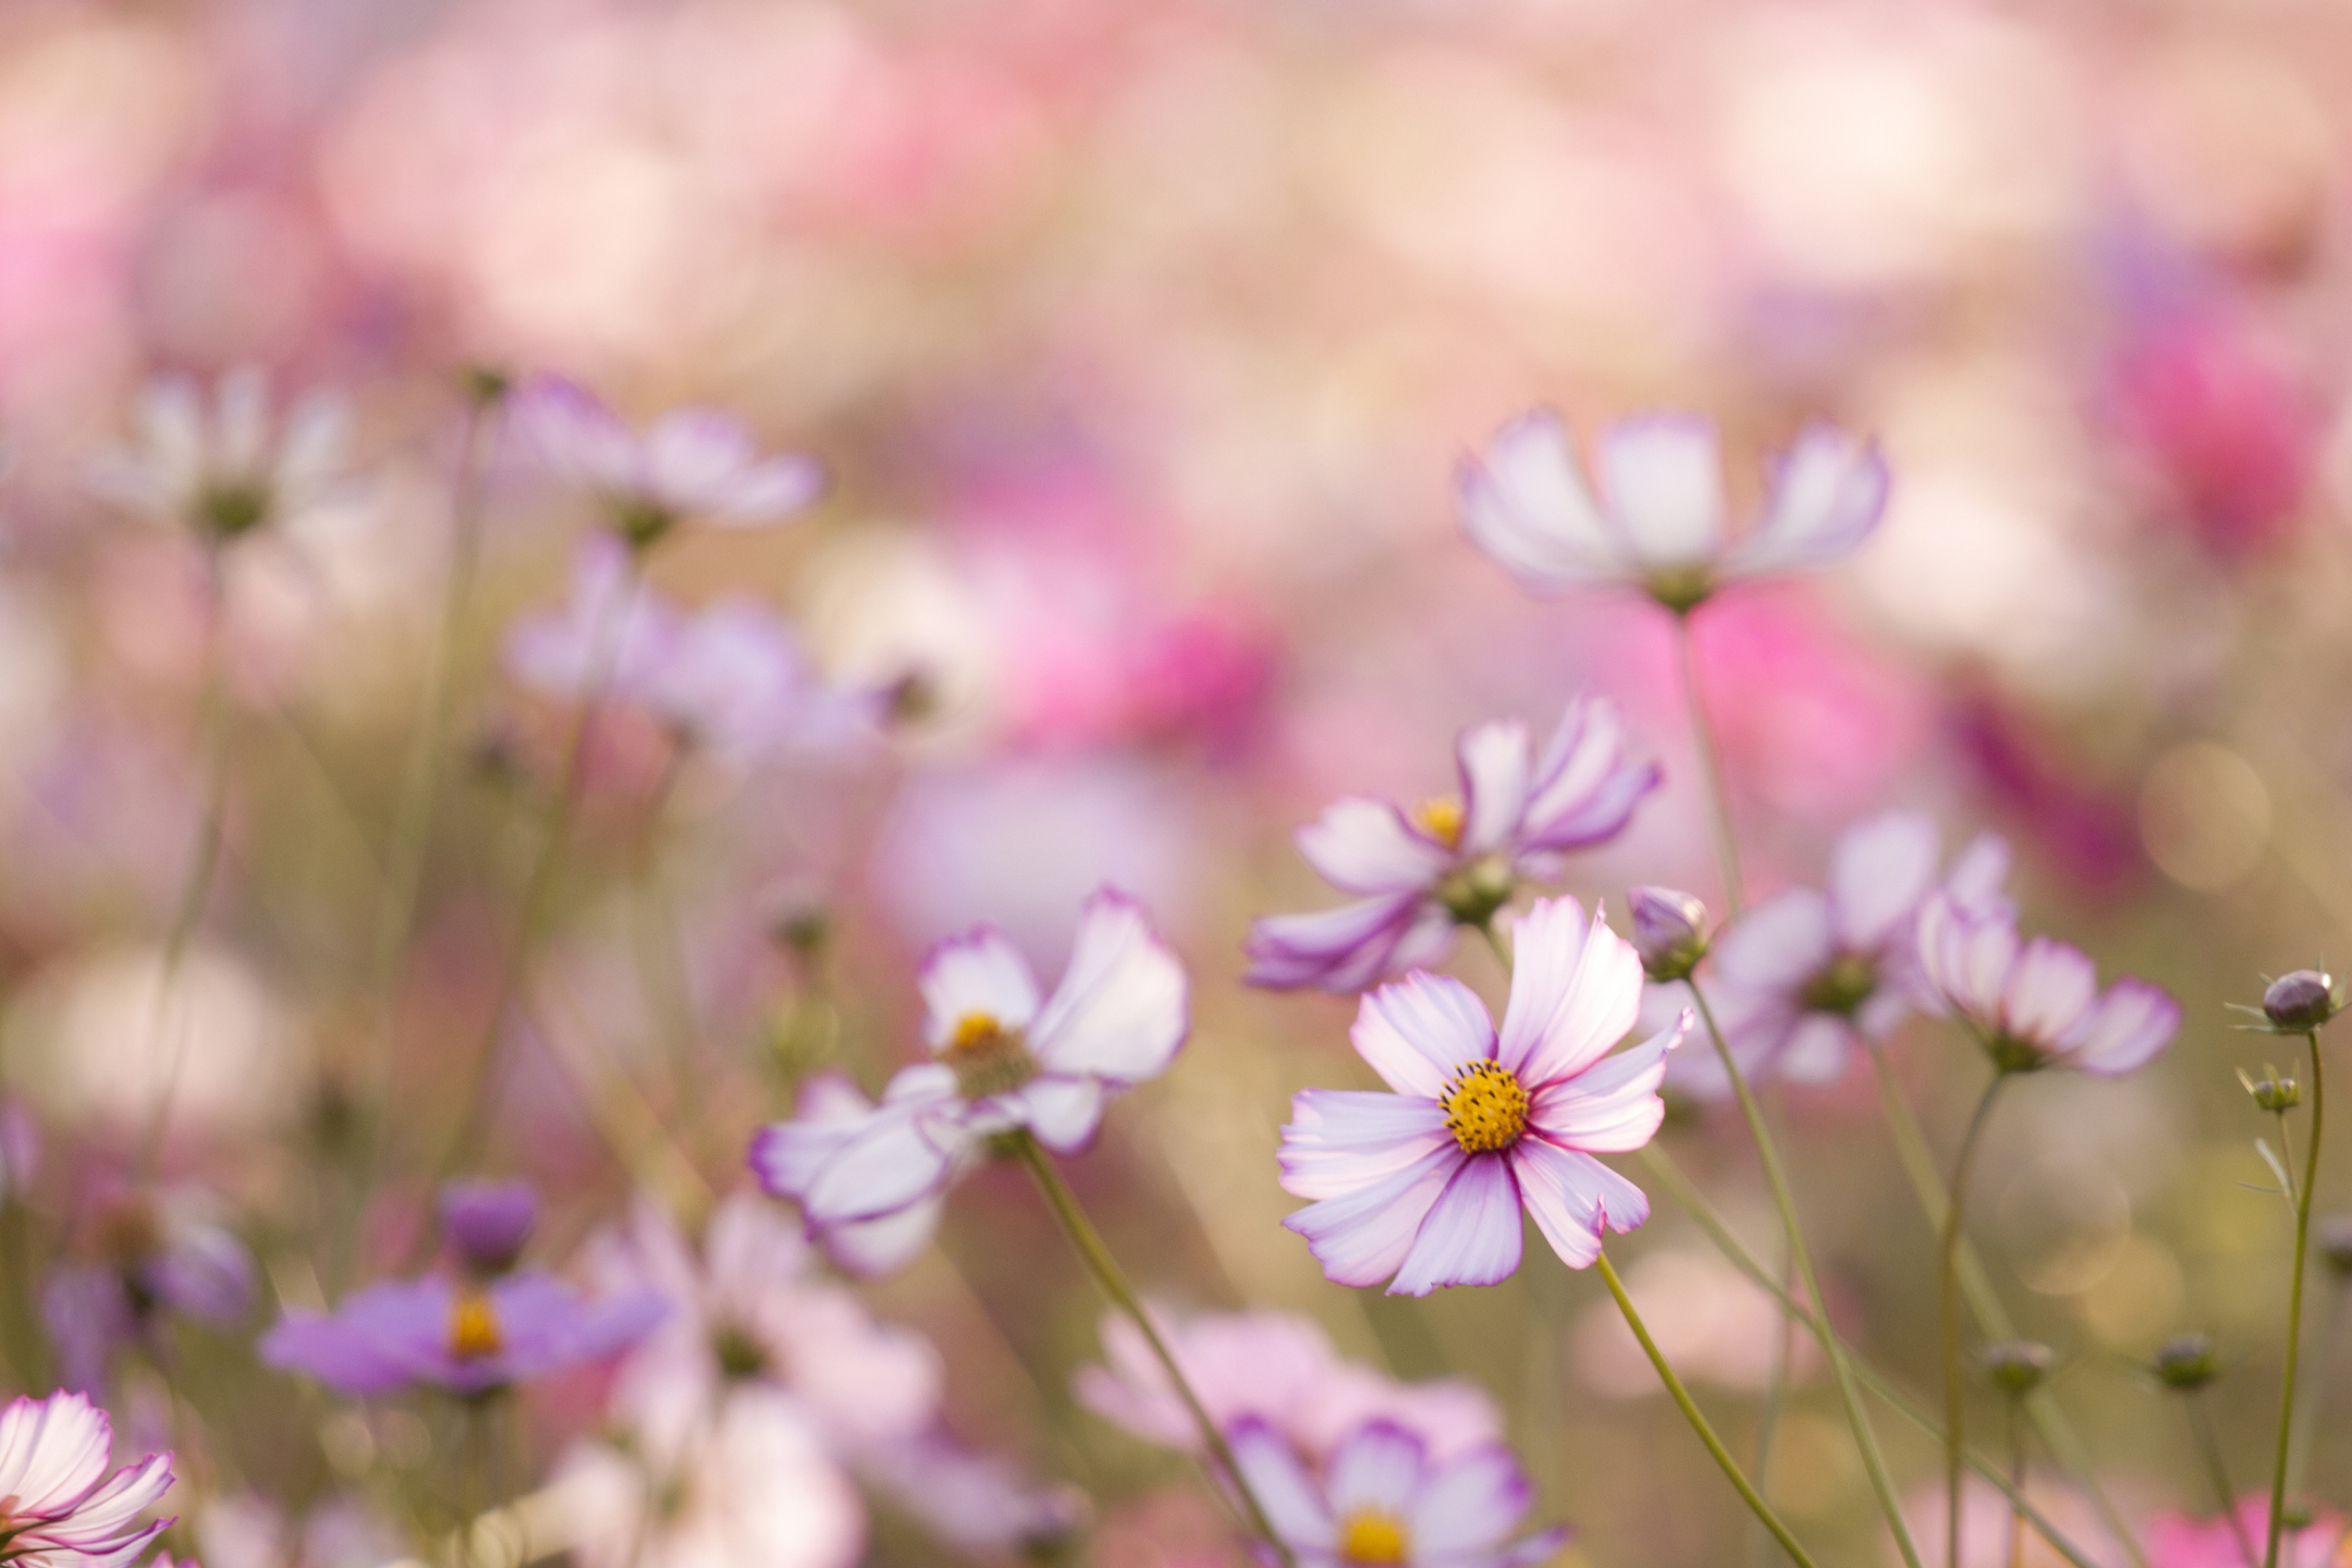 Field Of White And Pink Petals wallpaper 2880x1920